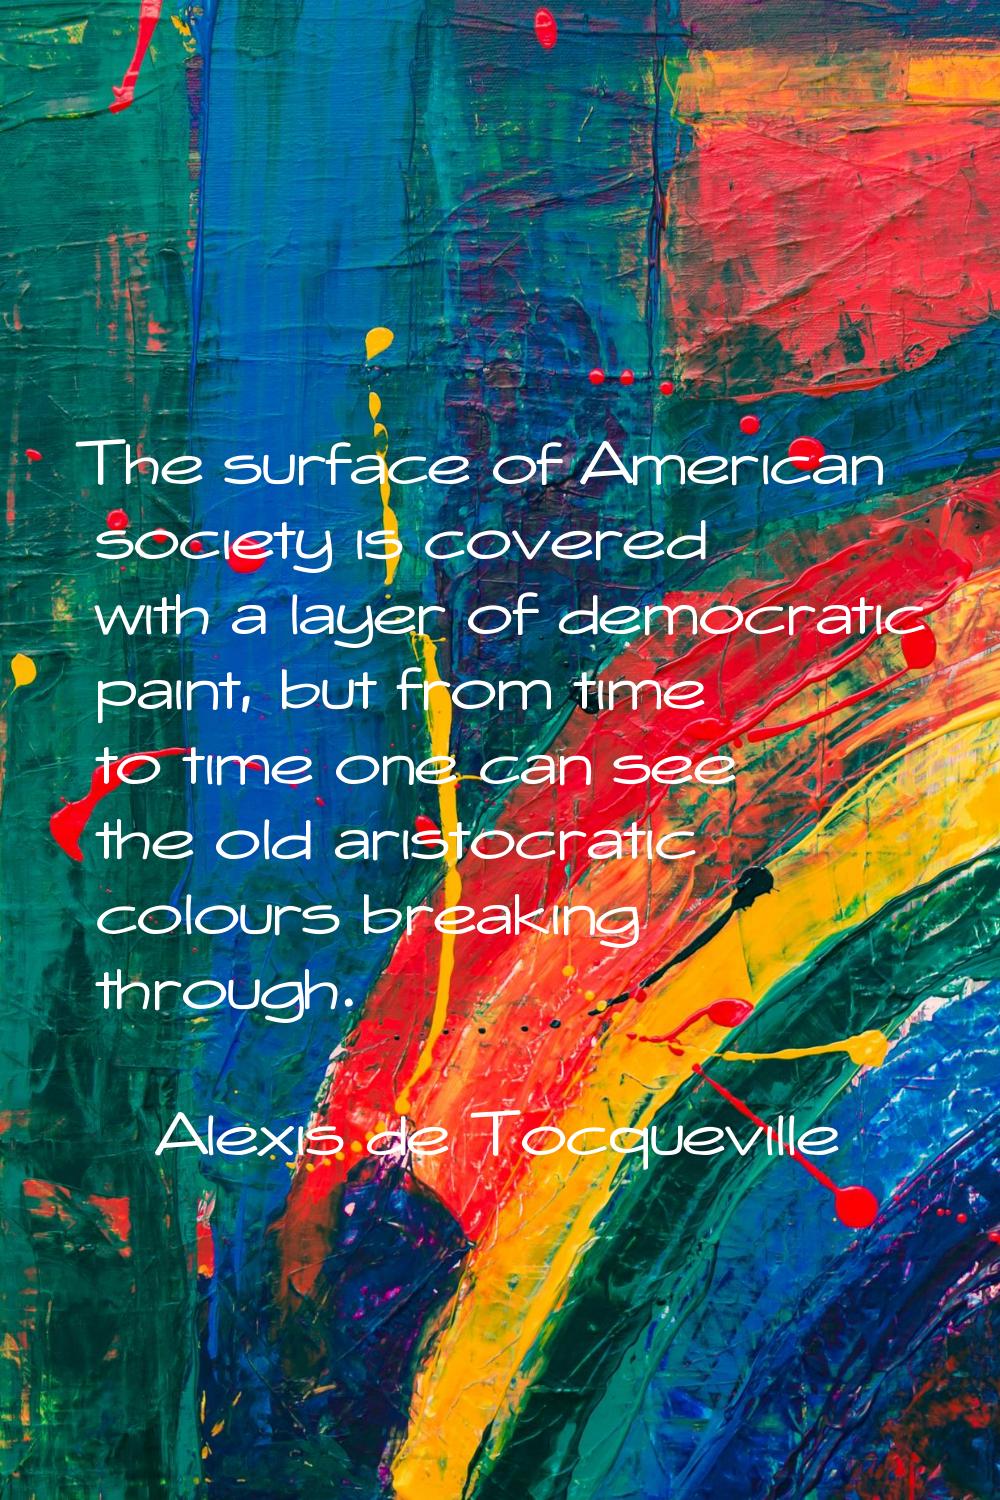 The surface of American society is covered with a layer of democratic paint, but from time to time 